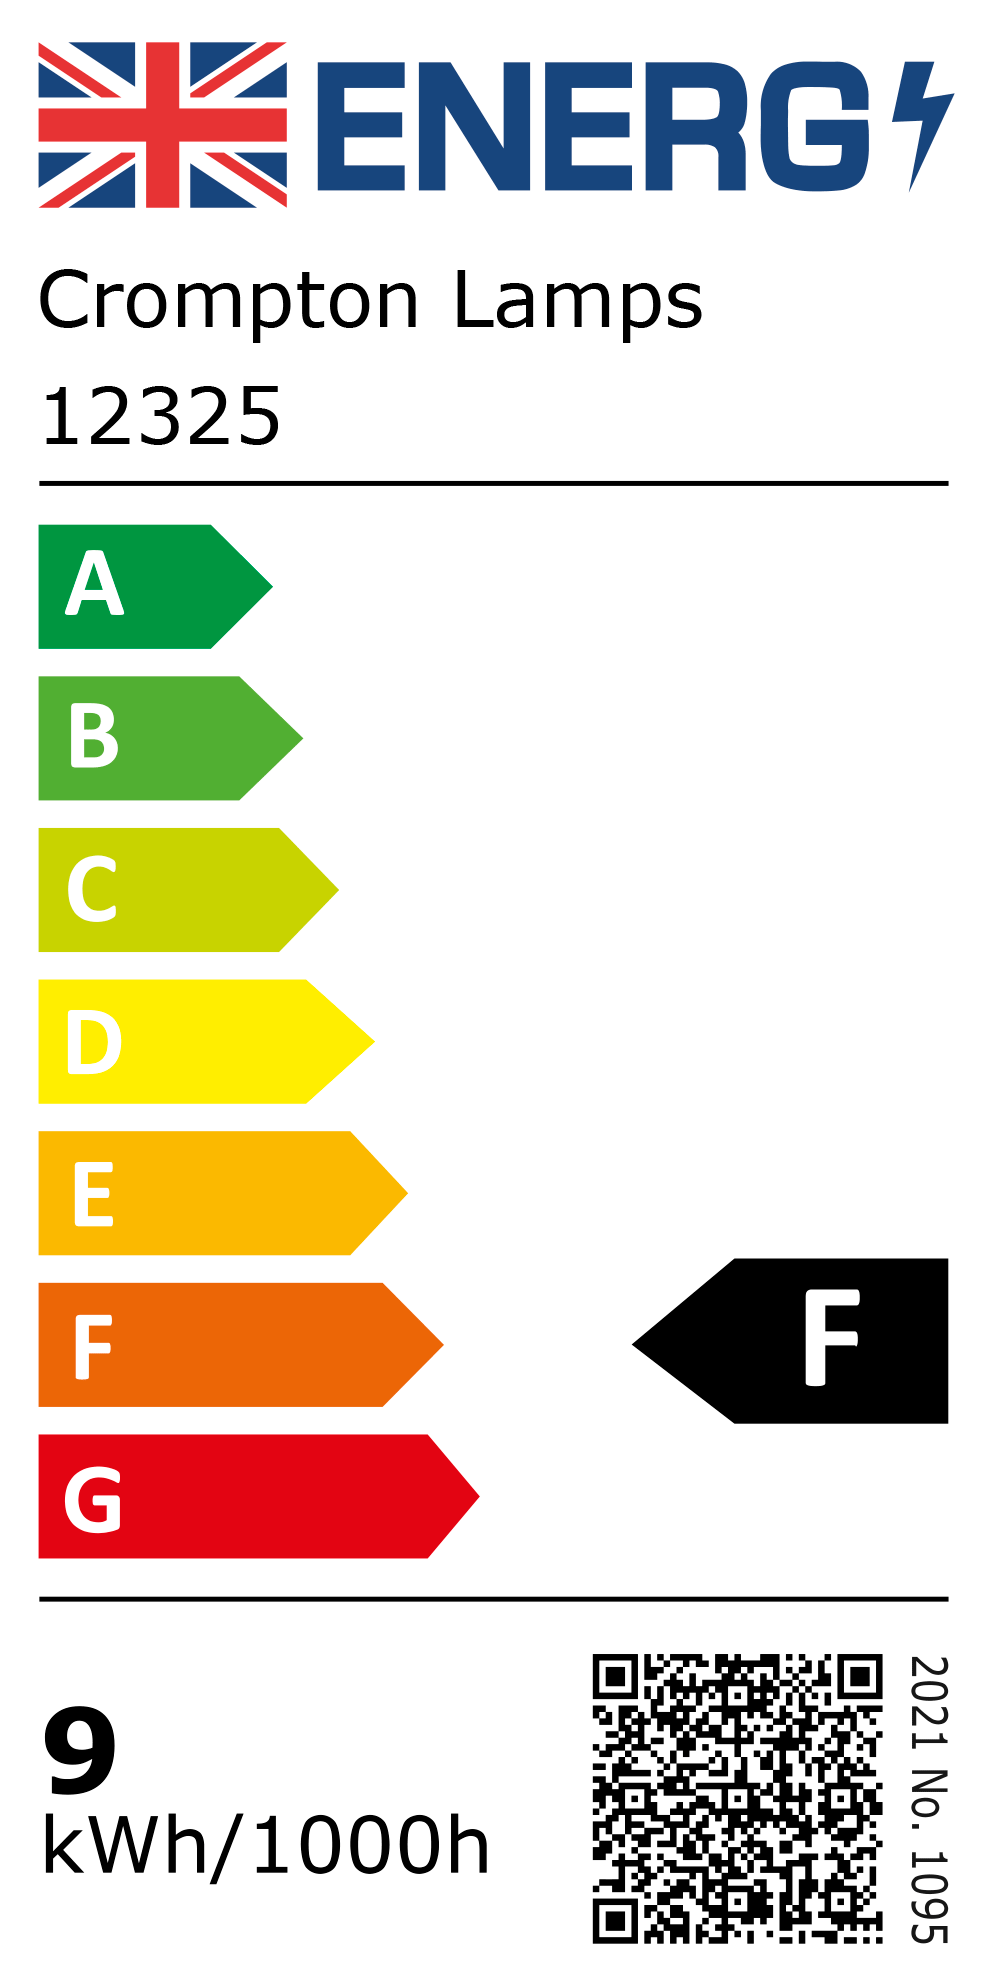 New 2021 Energy Rating Label: Stock Code 12325